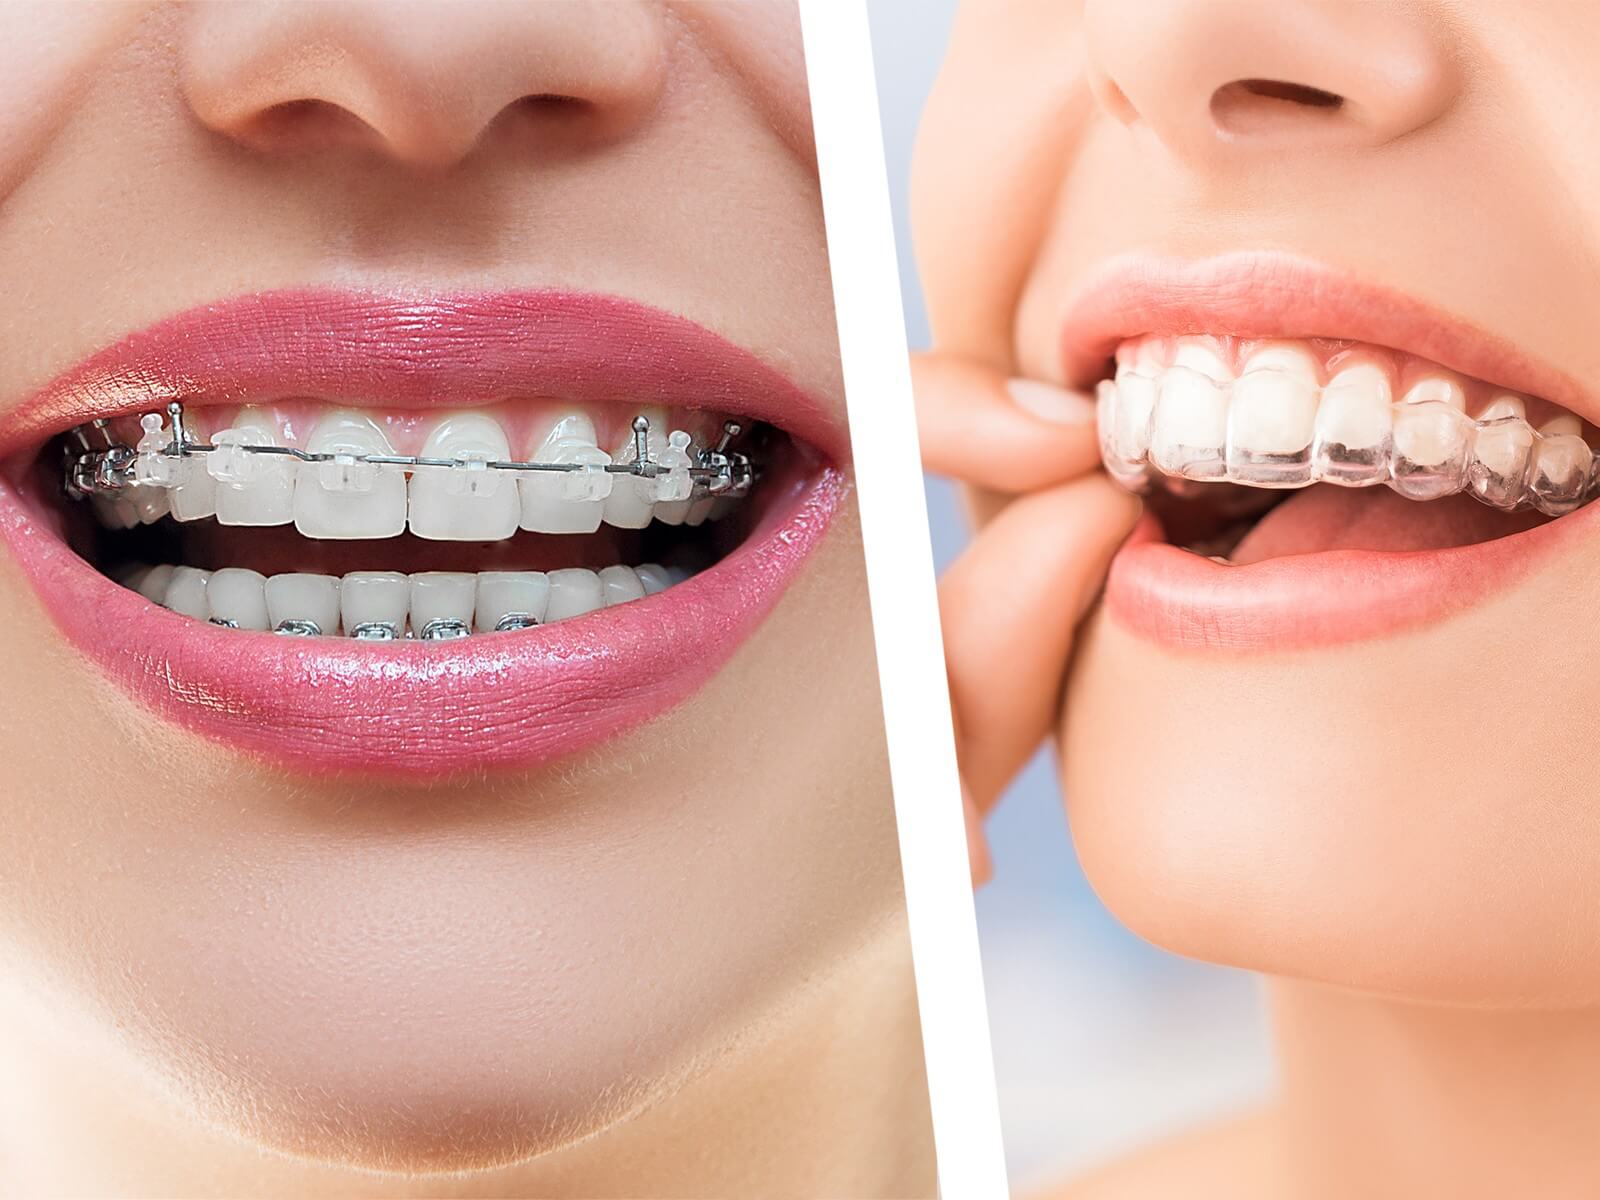 Which one is better: Invisalign or Braces?